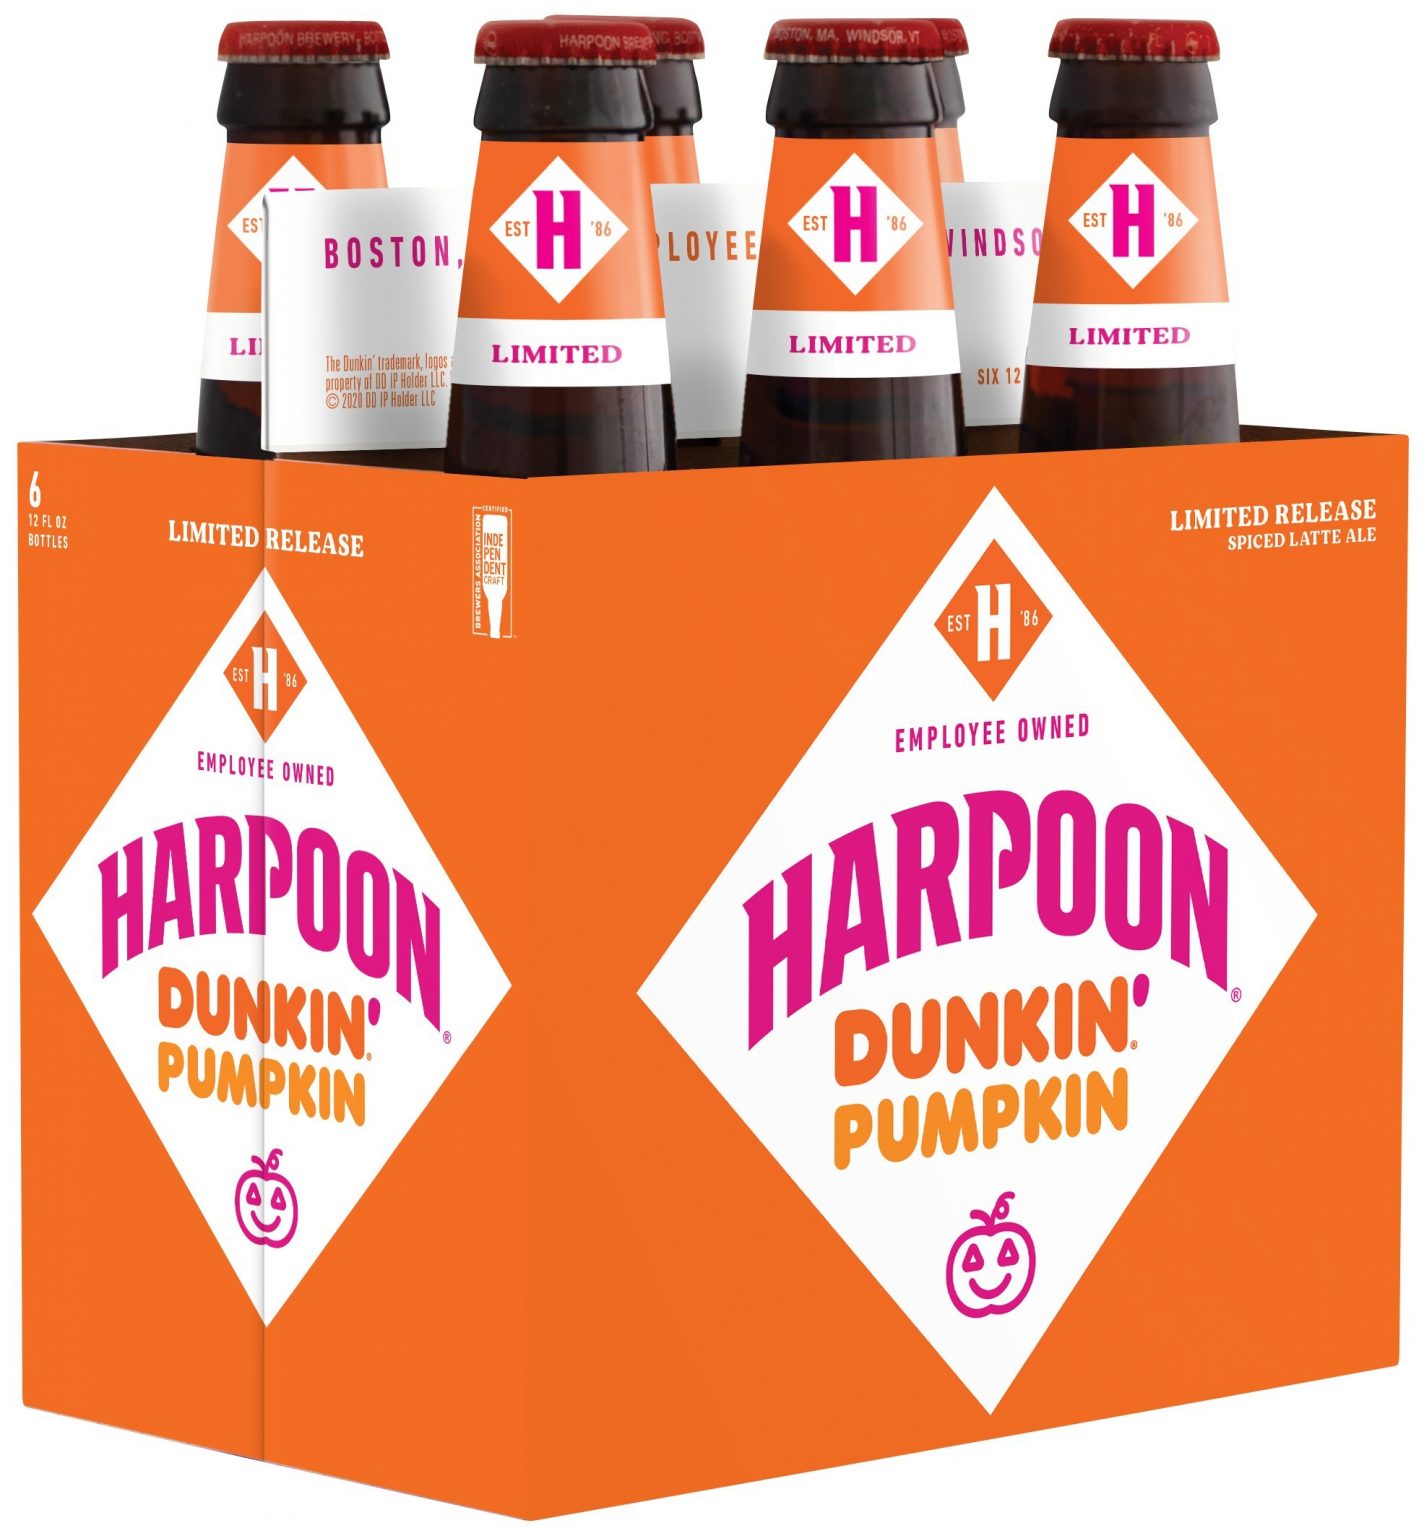 Dunkin' launches three new beers brewed with actual coffee and donuts